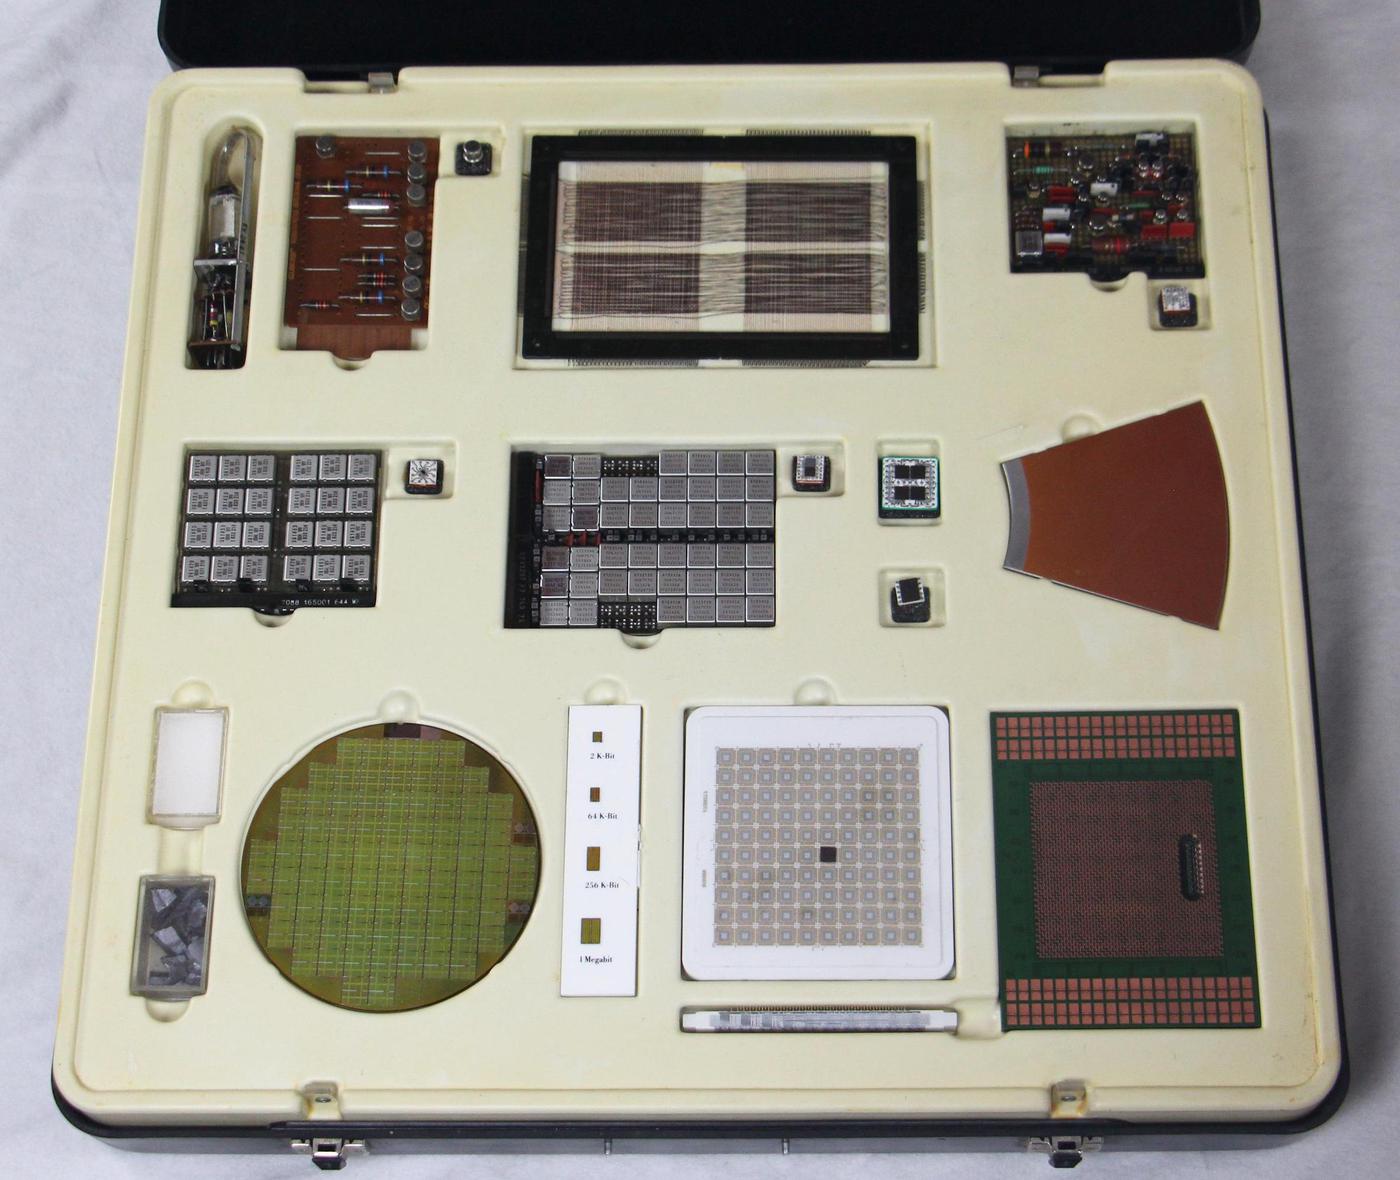 An IBM display box, showing components and board from different generations of computing. Click this (or any other photo) for a larger image.